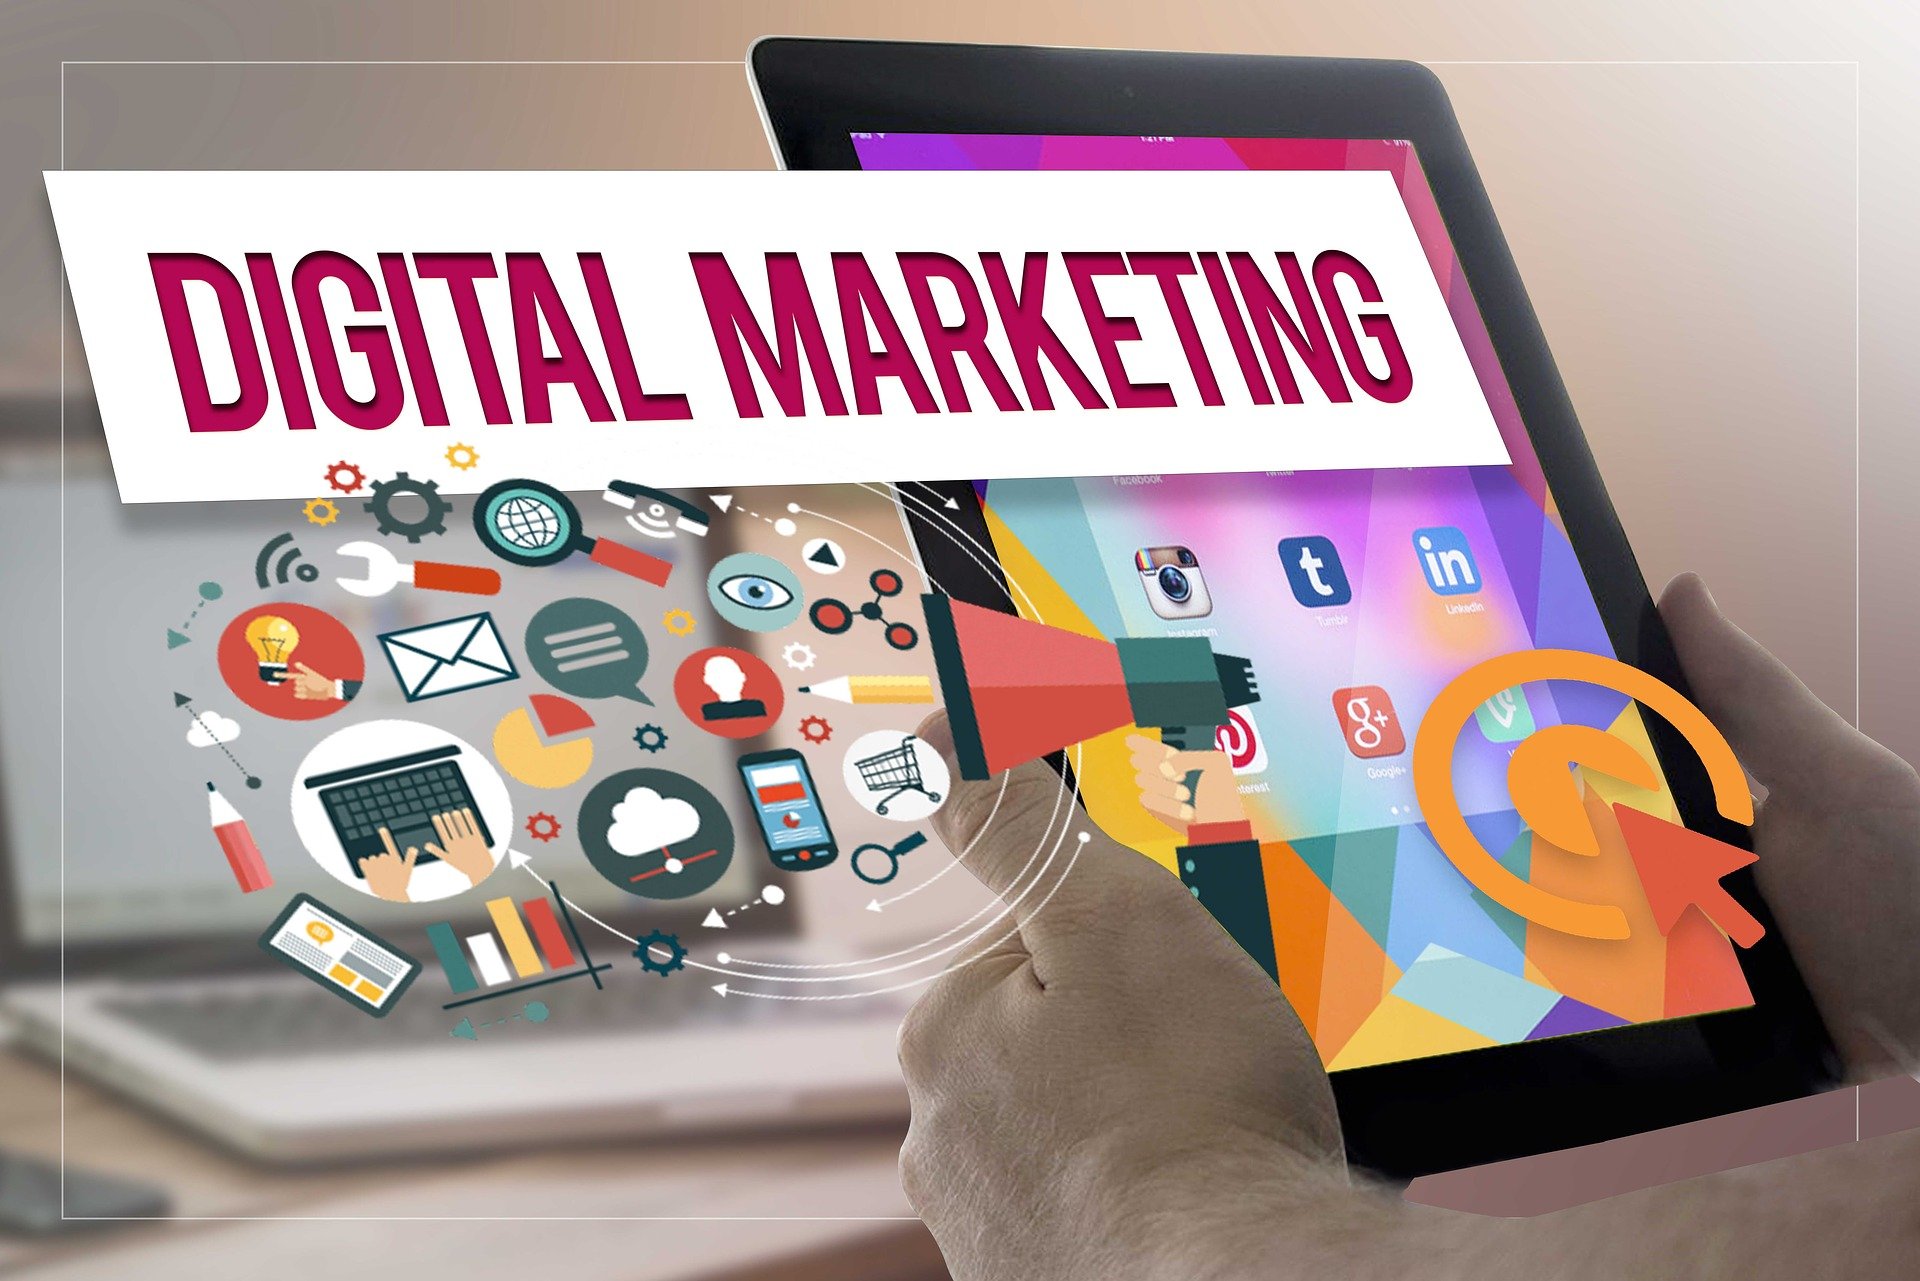 Digital Marketing With SEO - E-commerce Solution - Grow Your Business Online - Computer Course - Global Tech Computer Education